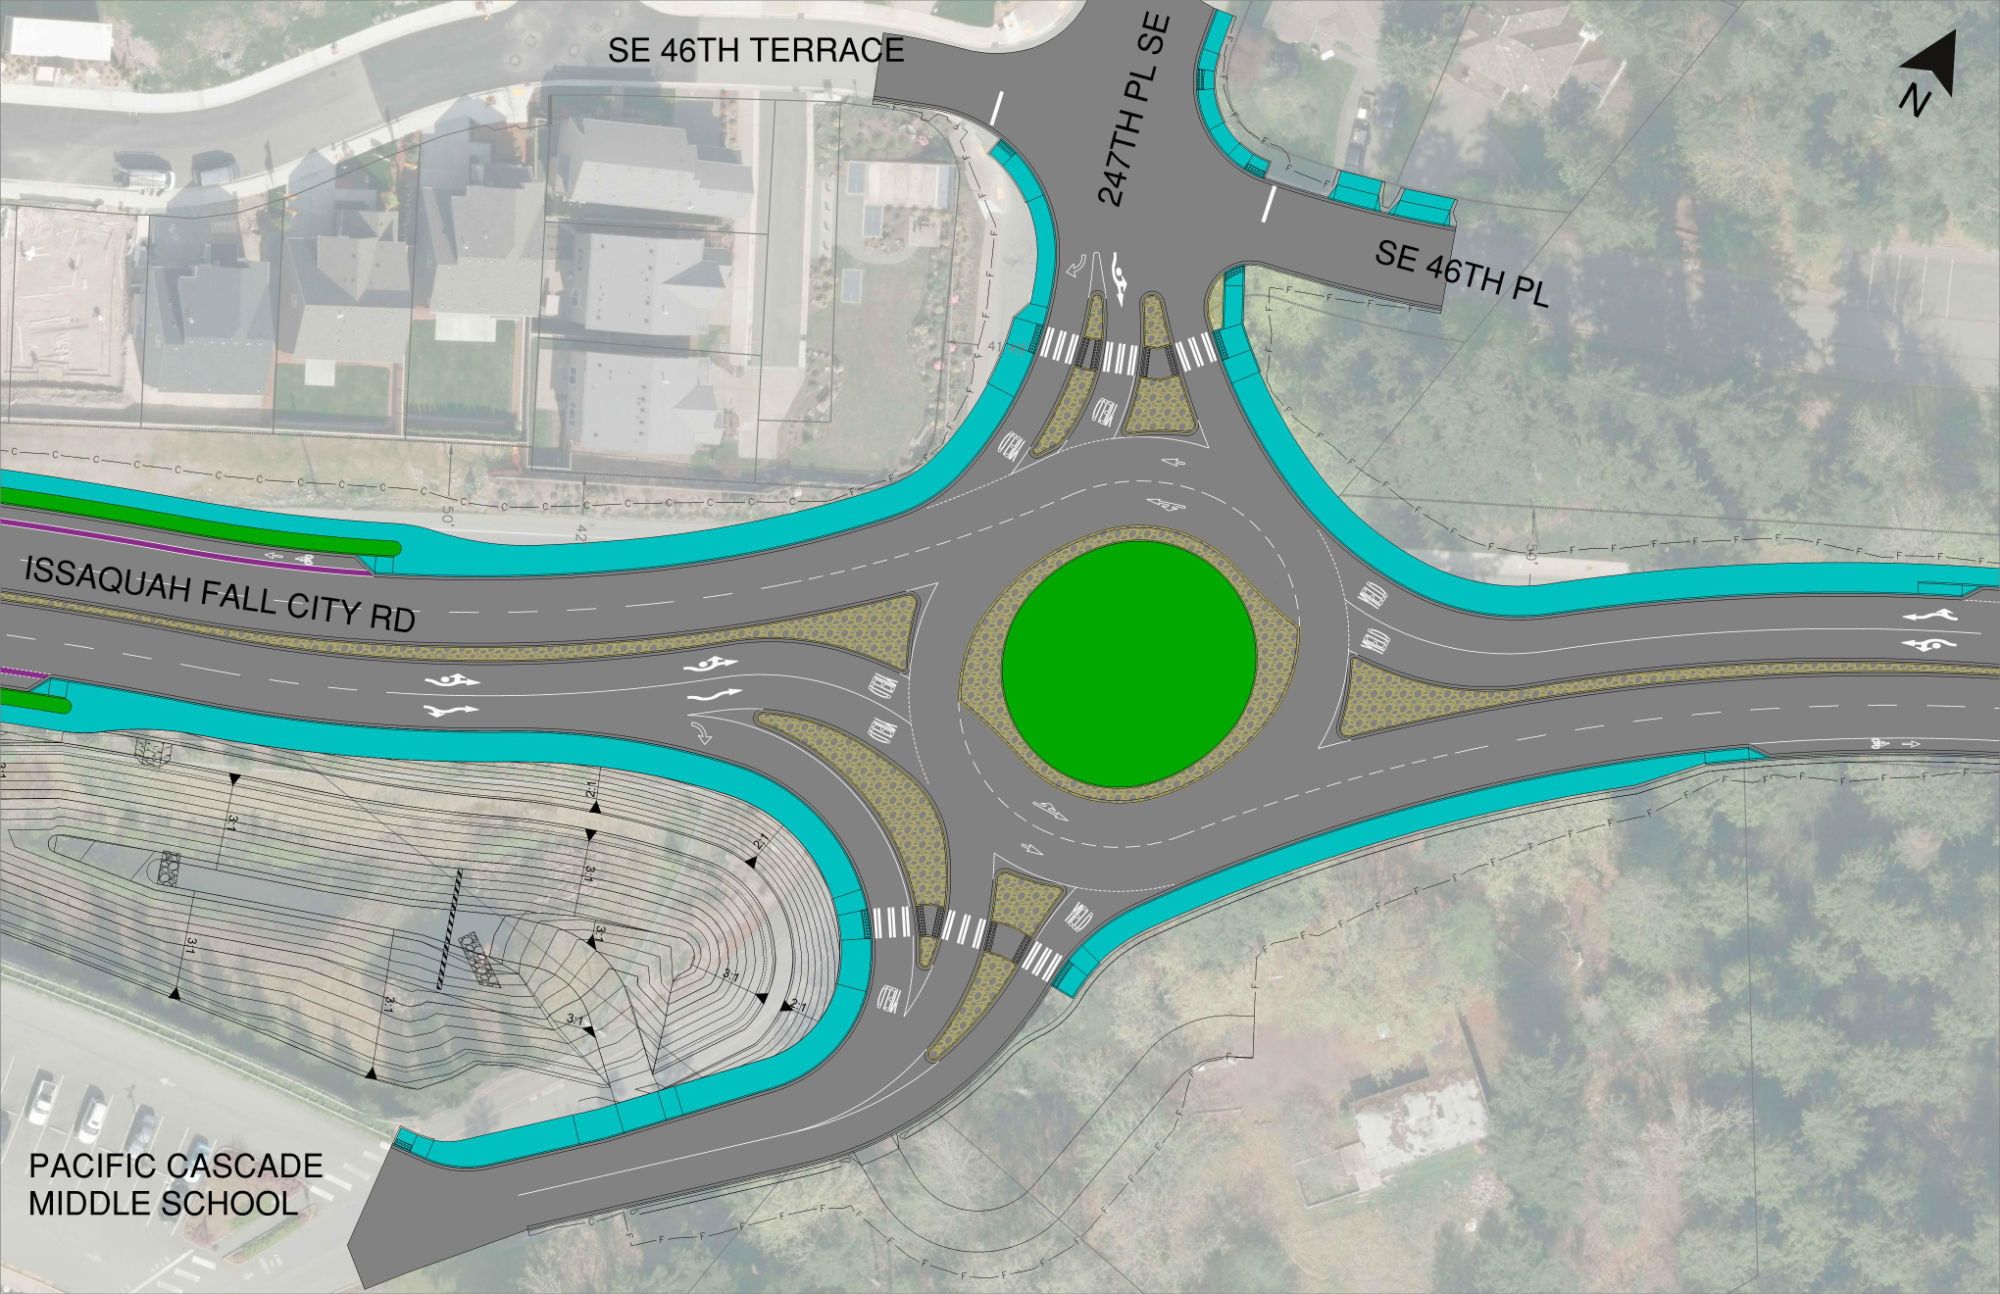 plan for Issaquah Fall City Road roundabout at 247th near Pacific Cascade Middle School